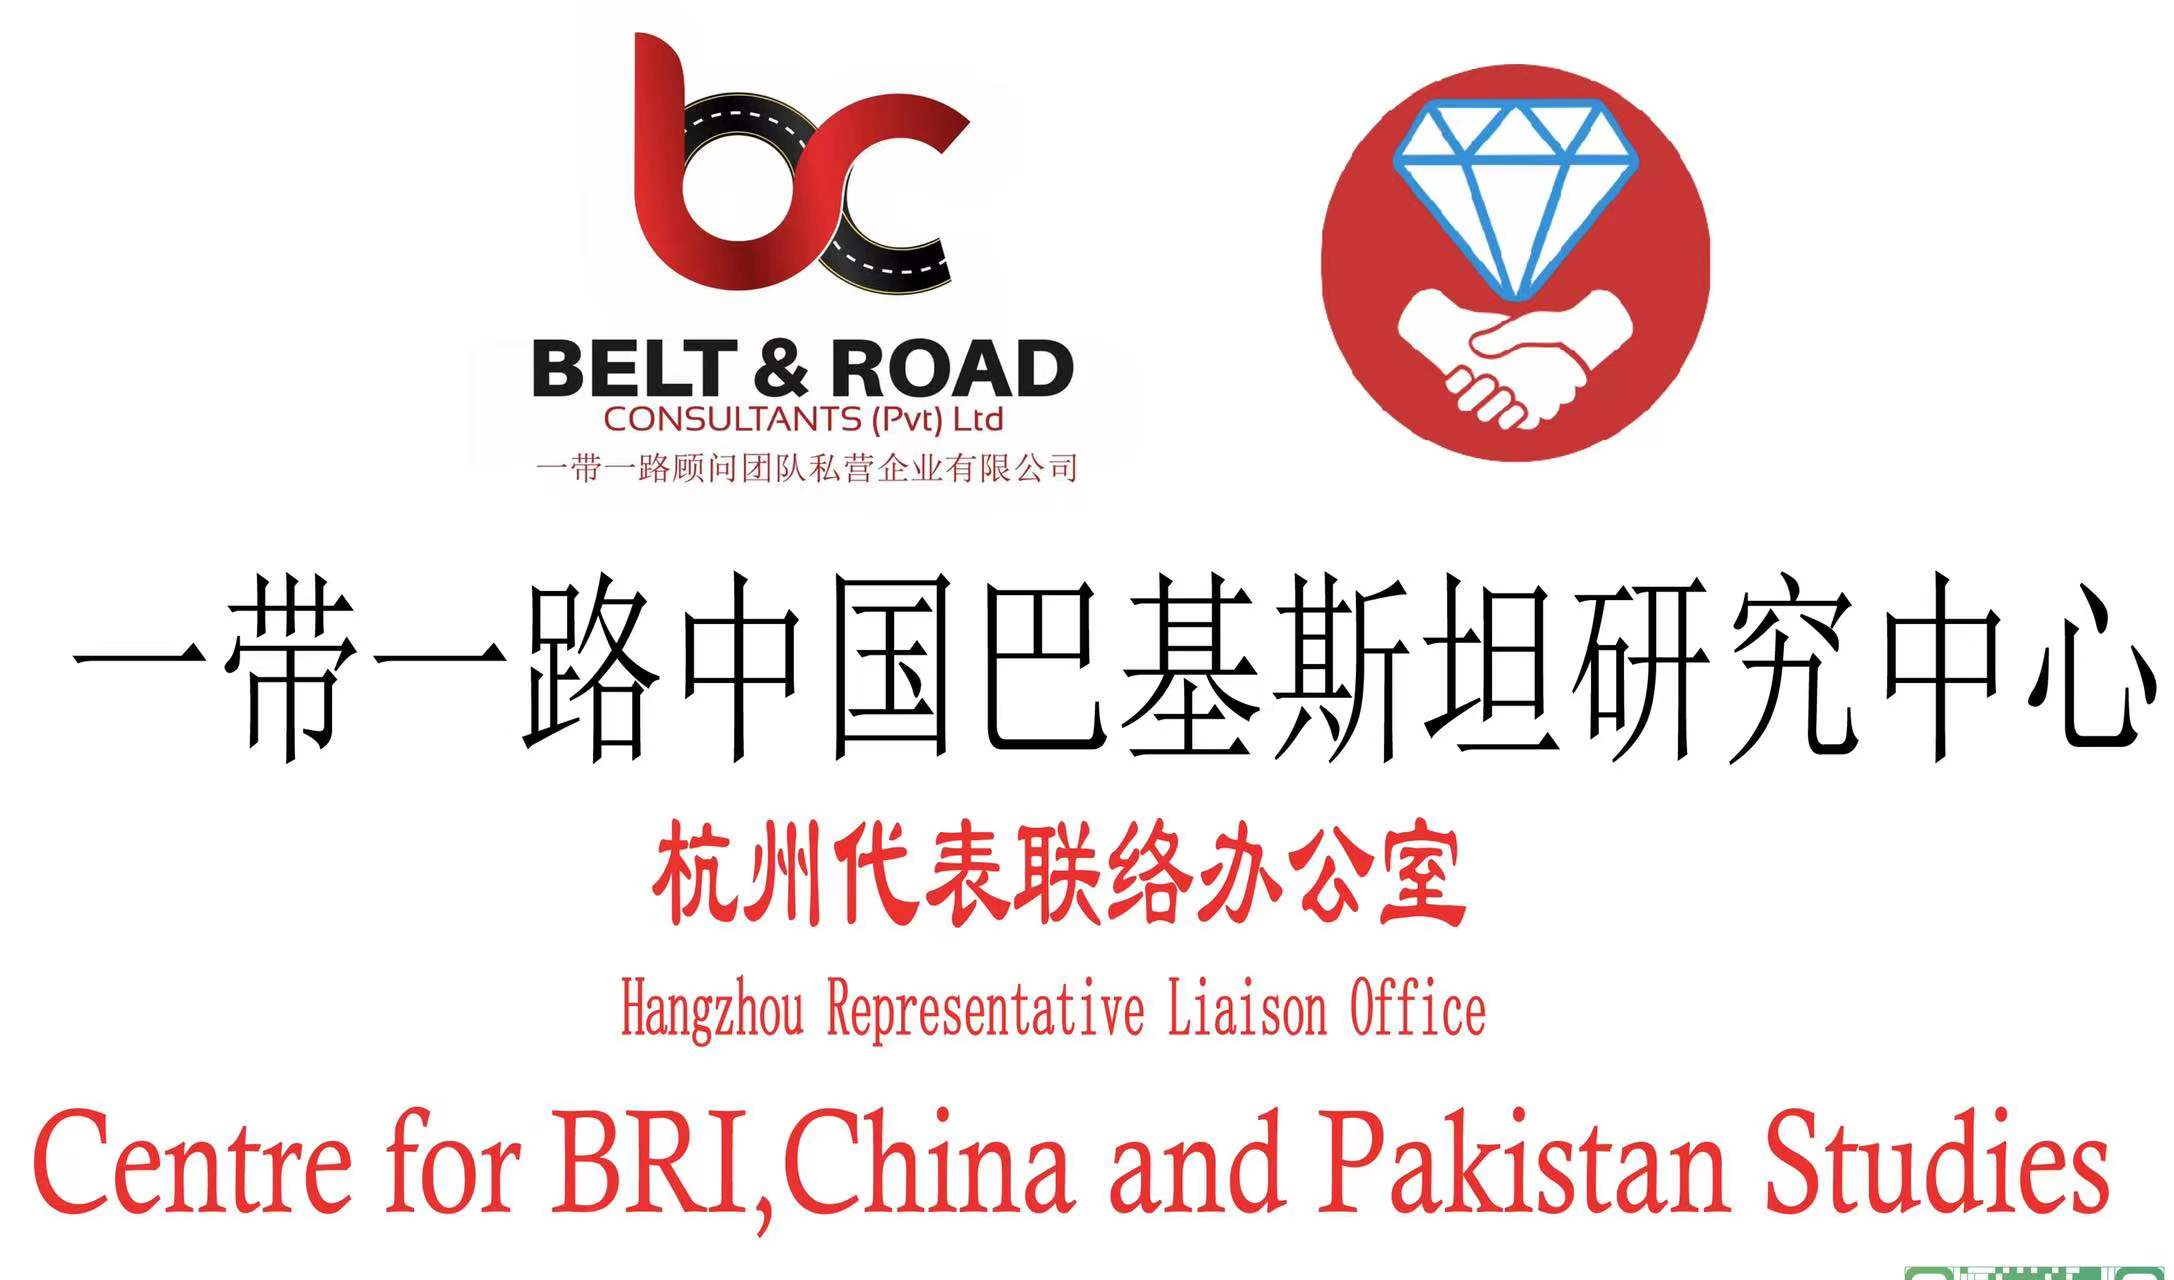 Centre for BRI, China and Pakistan Studies to be established in China